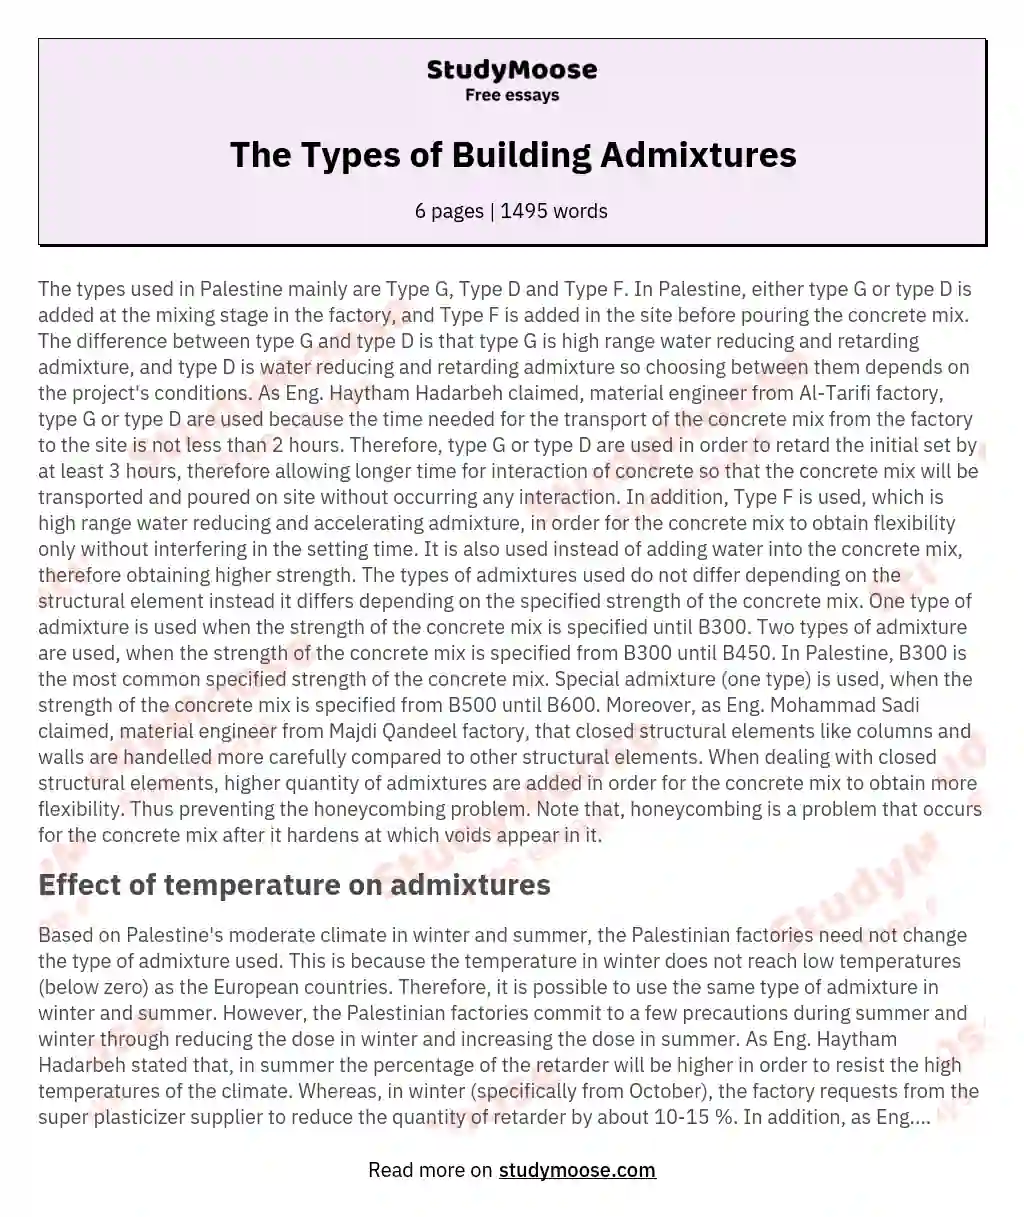 The Types of Building Admixtures essay